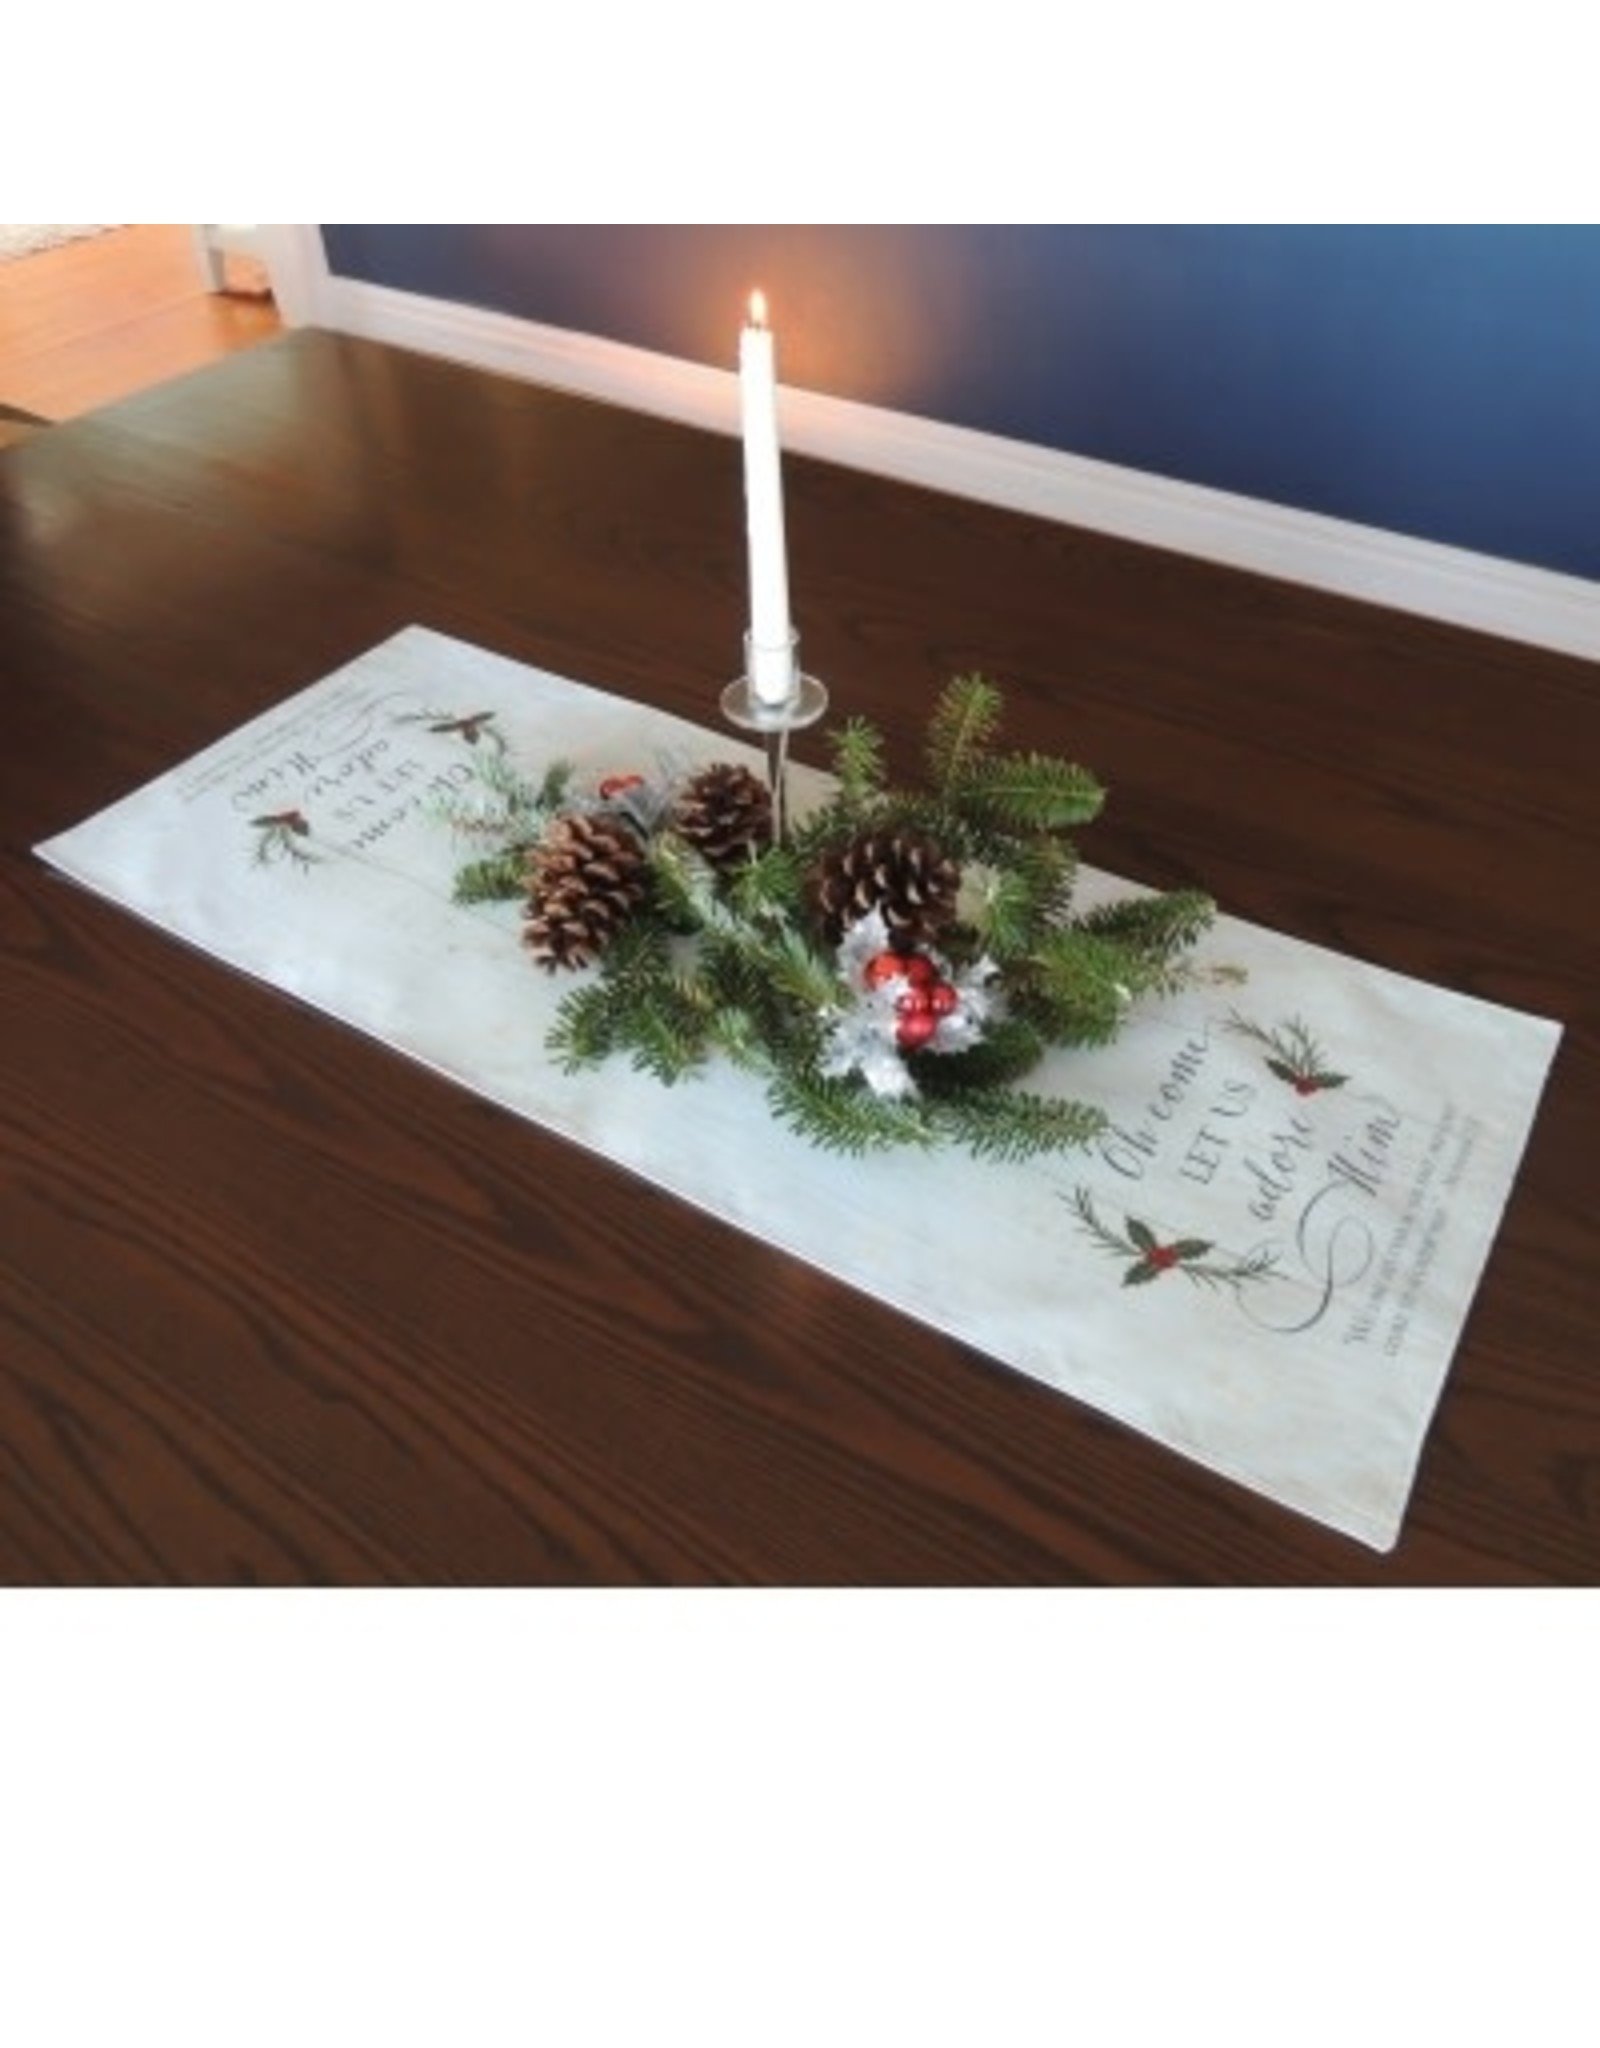 Table Runner (36") - "Oh Come Let Us Adore Him"